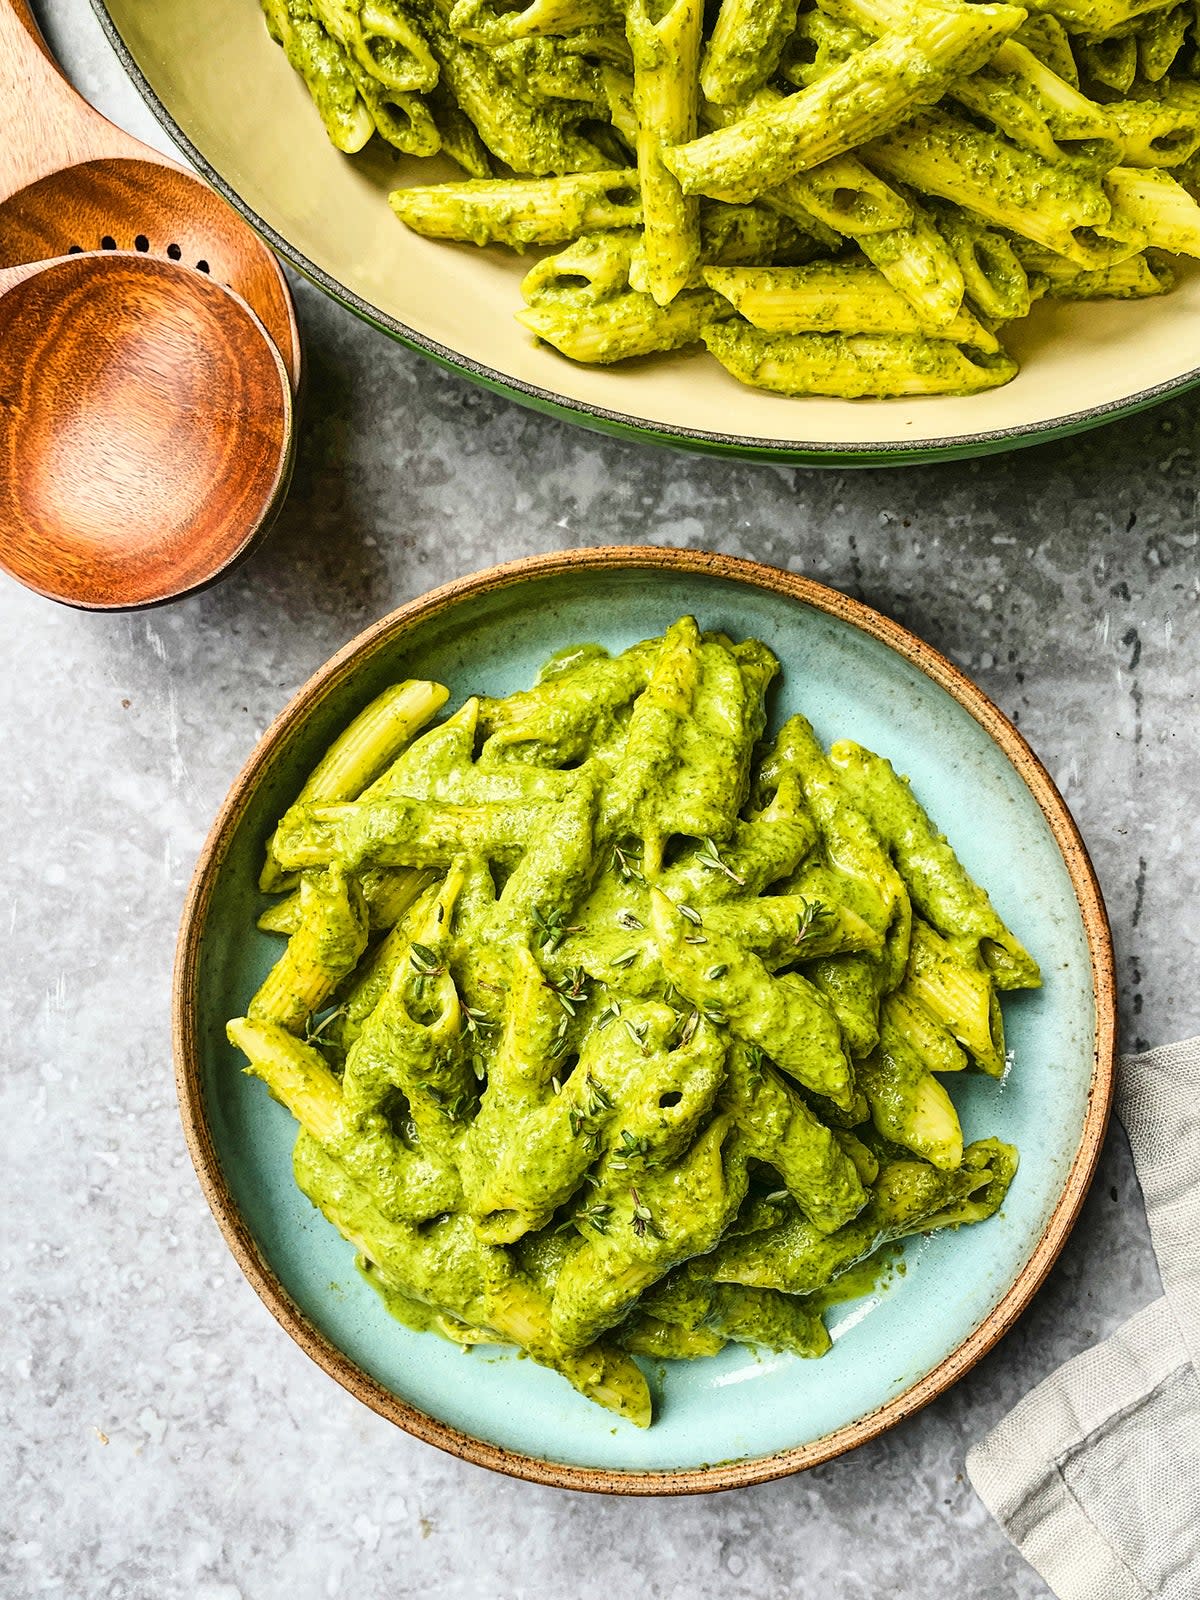 This pasta sauce is a healthy alternative to classic pesto pasta (Discover Great Veg)